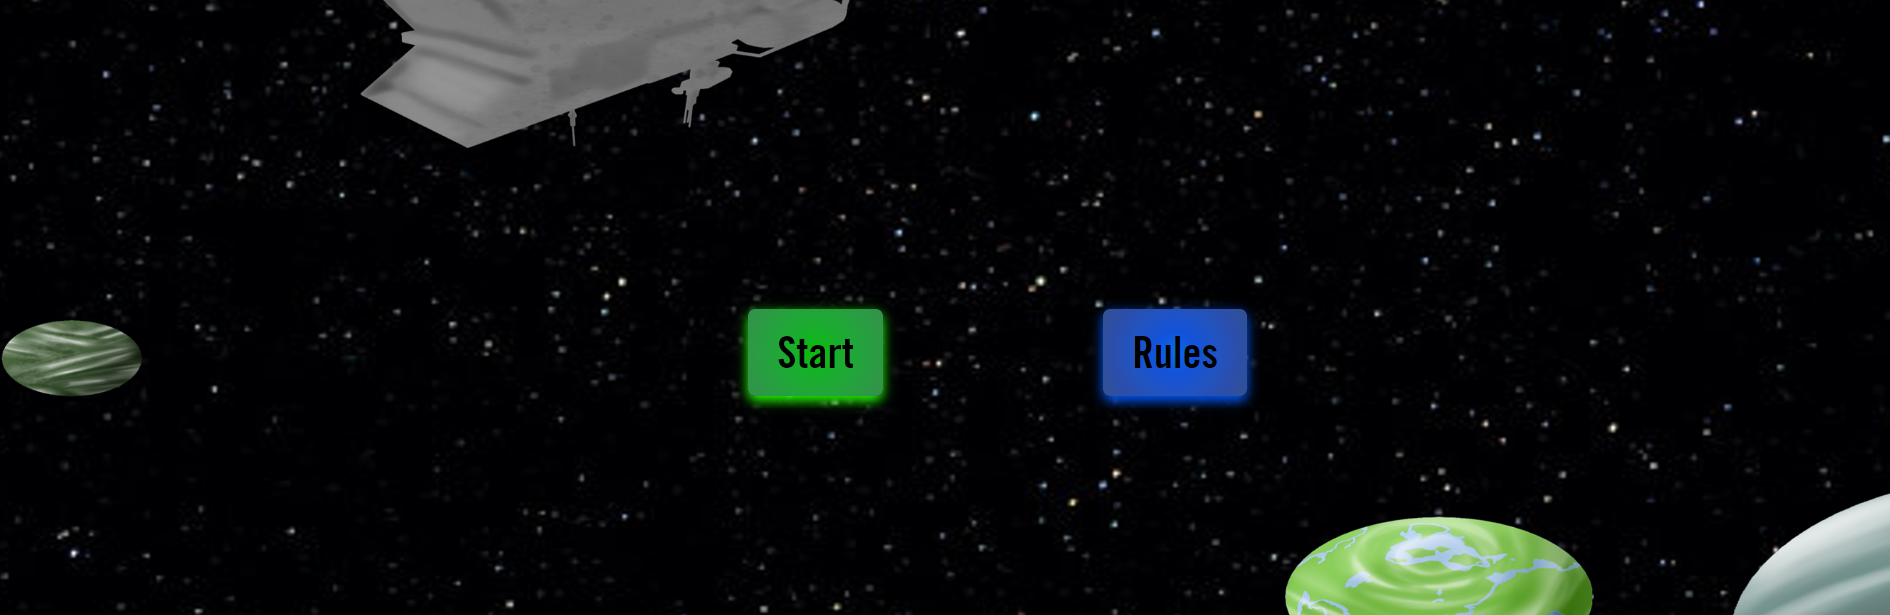 Start and Rules Buttons